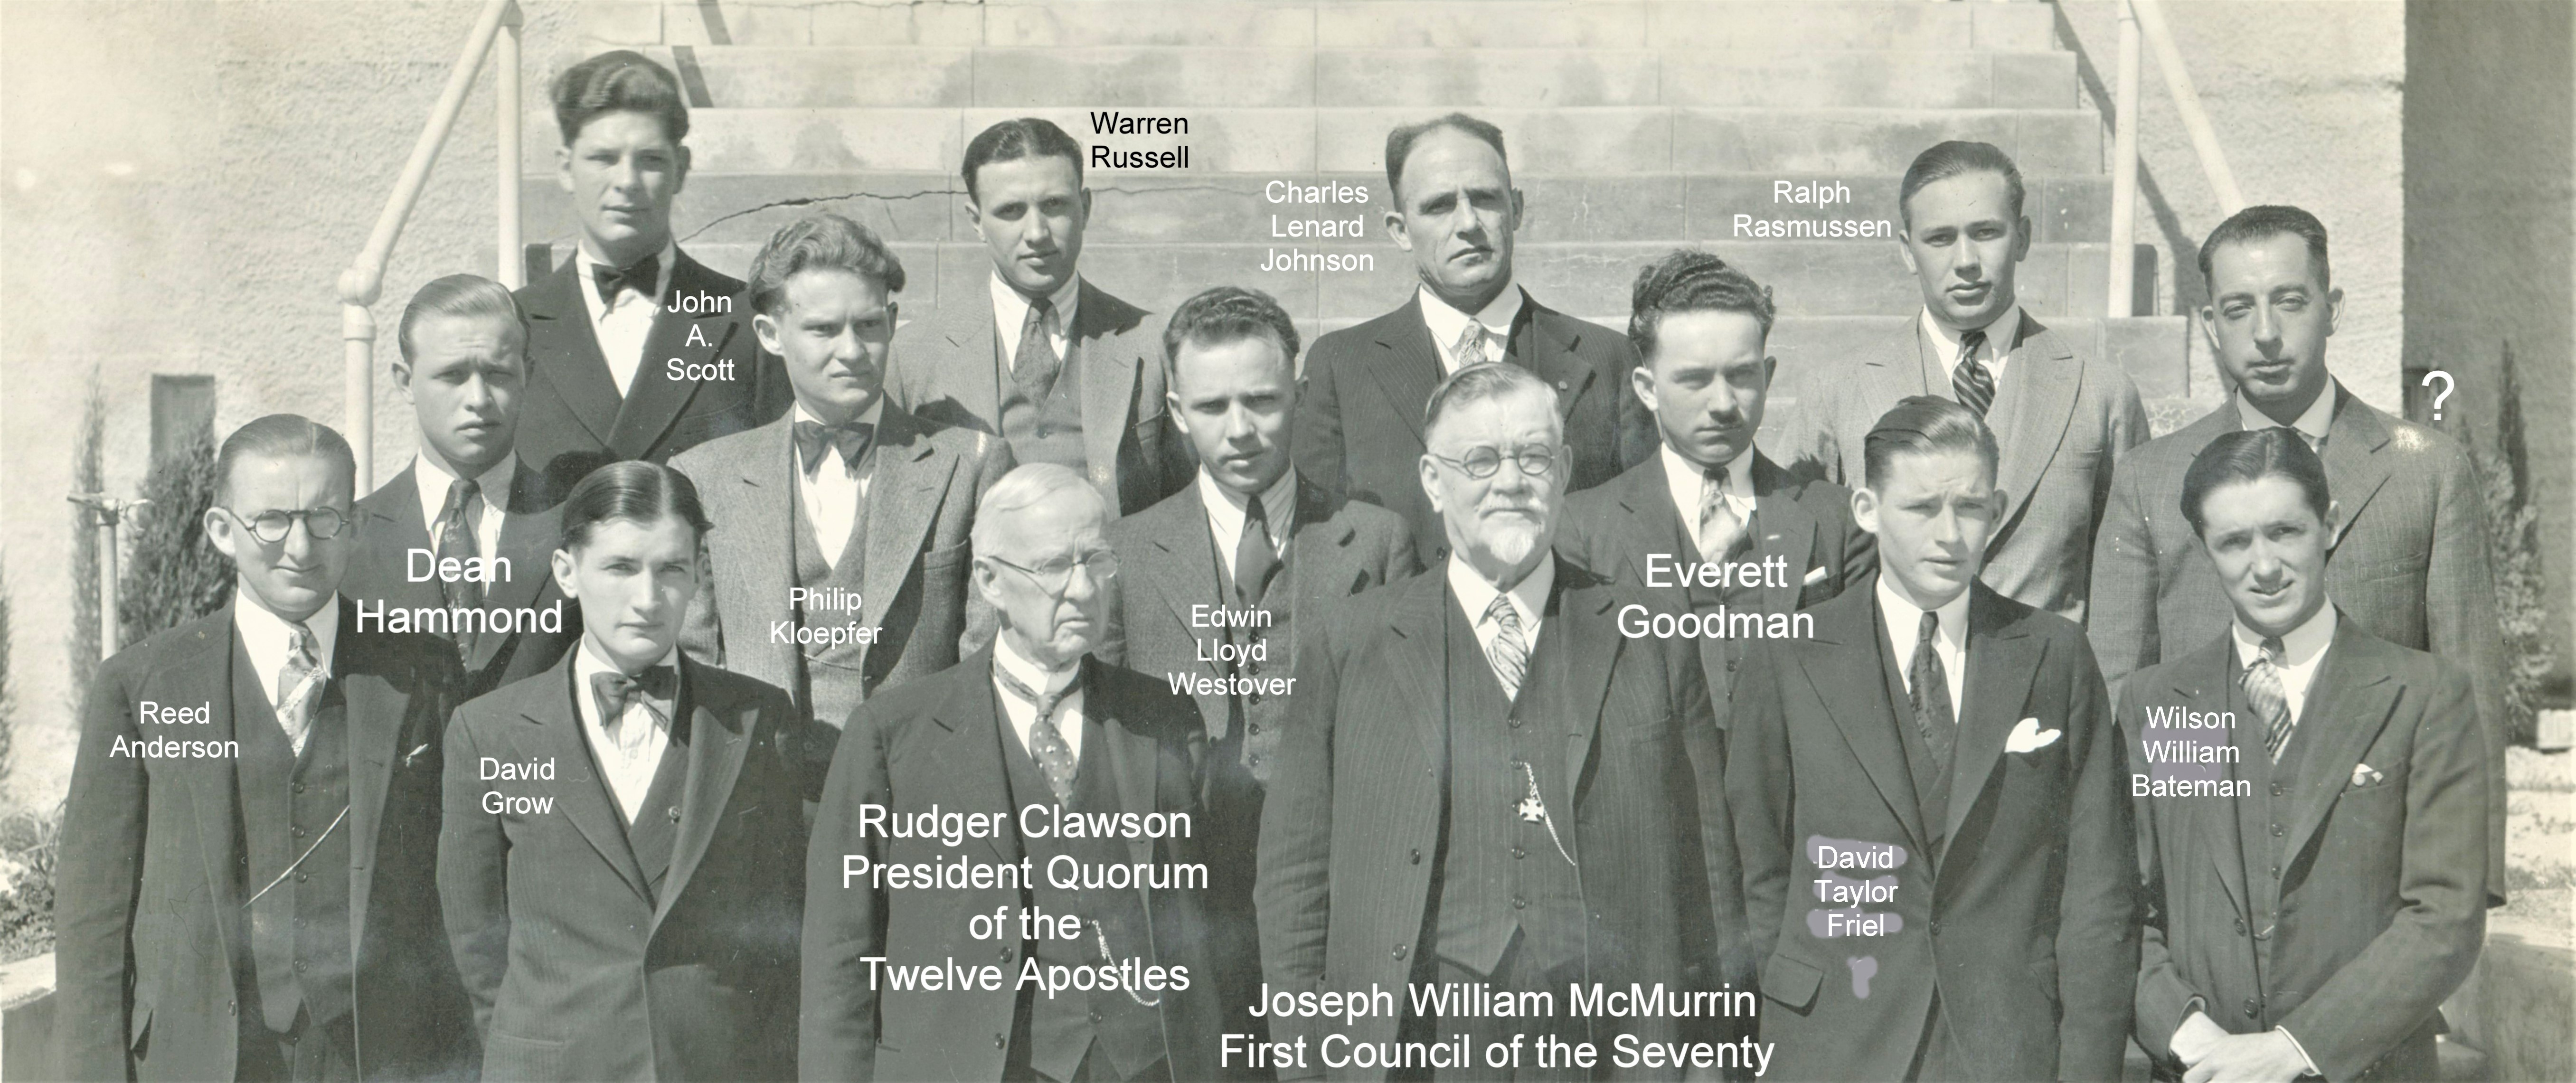 General Authorities & Mission Conference ~ Tucson, Arizona,  1930 February 28